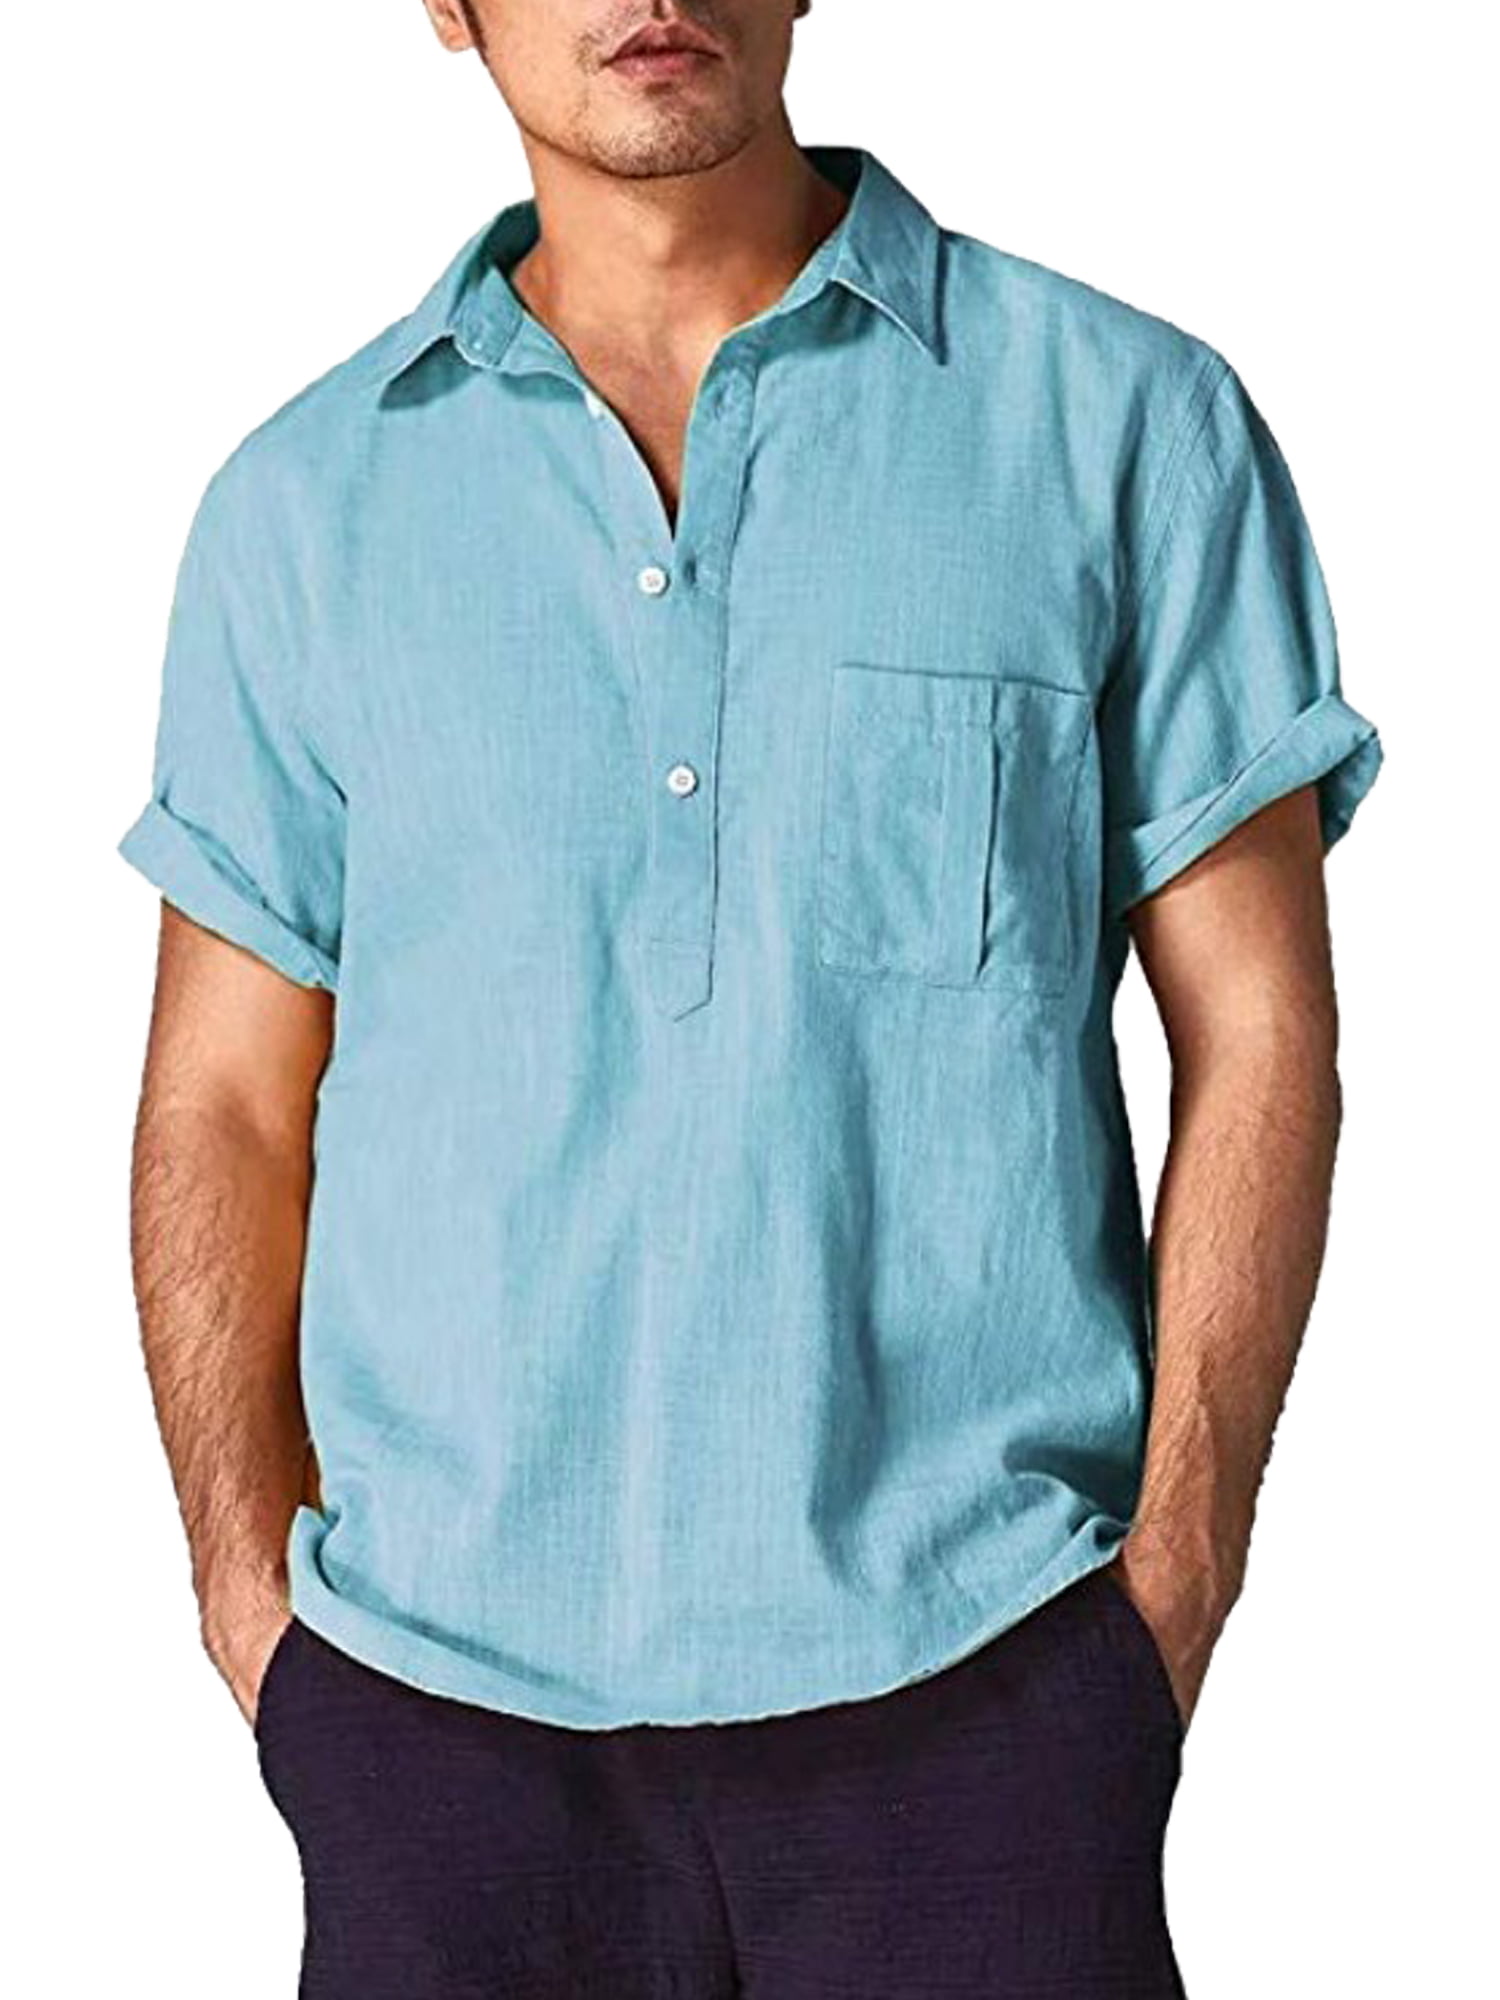 Sweatwater Mens Short Sleeve Solid Lapel Neck Formal Button Down Shirts